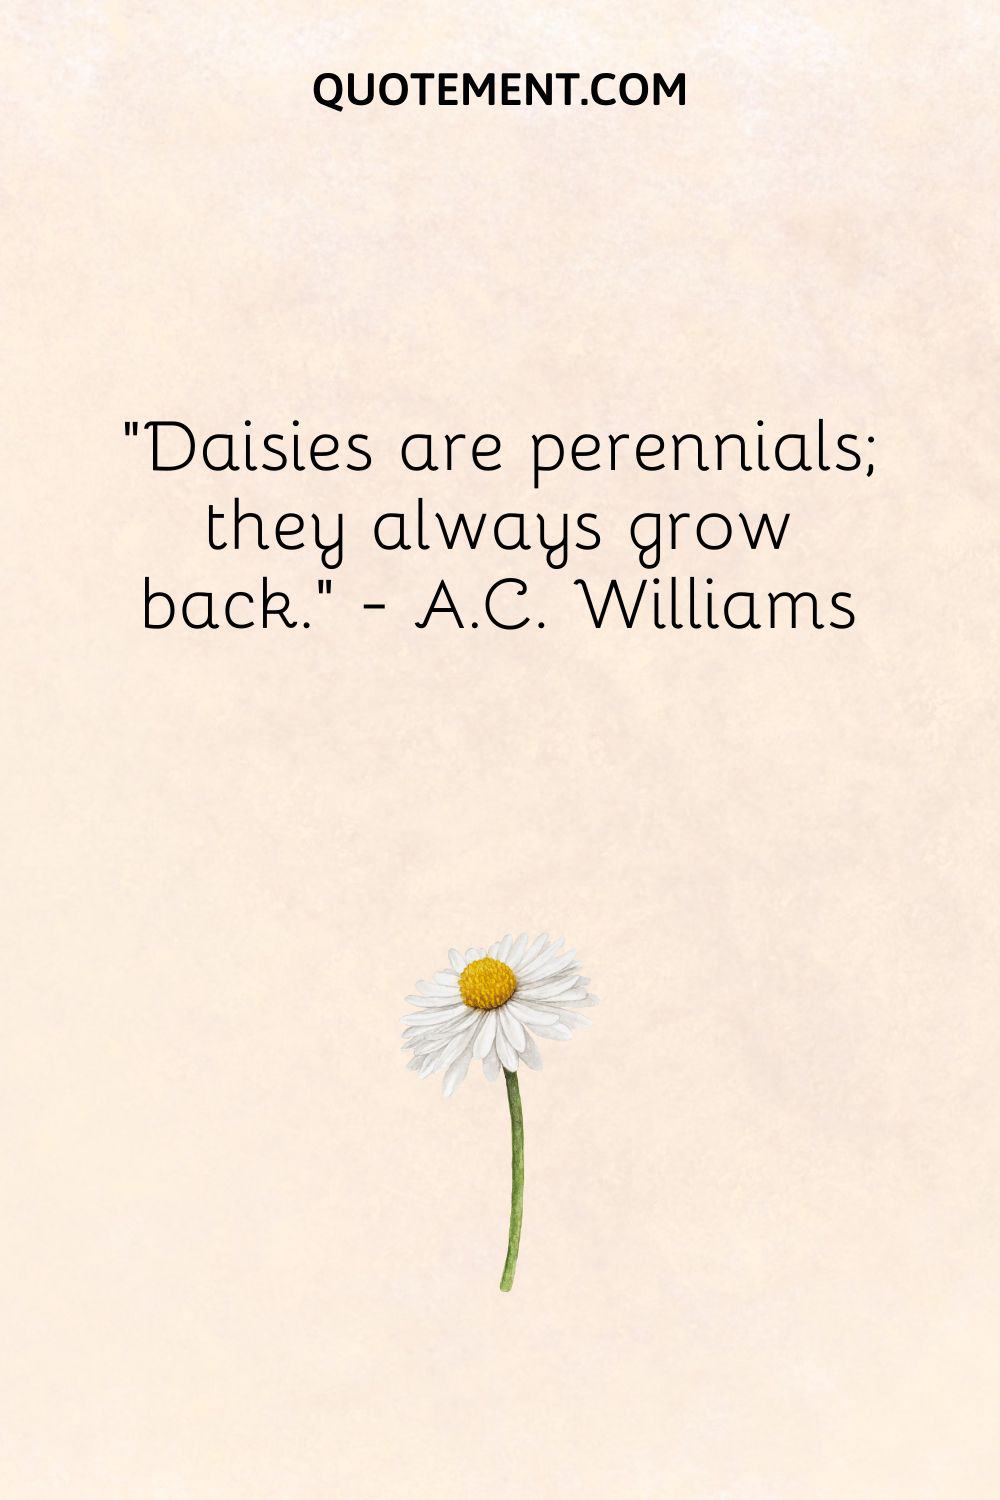 Daisies are perennials; they always grow back